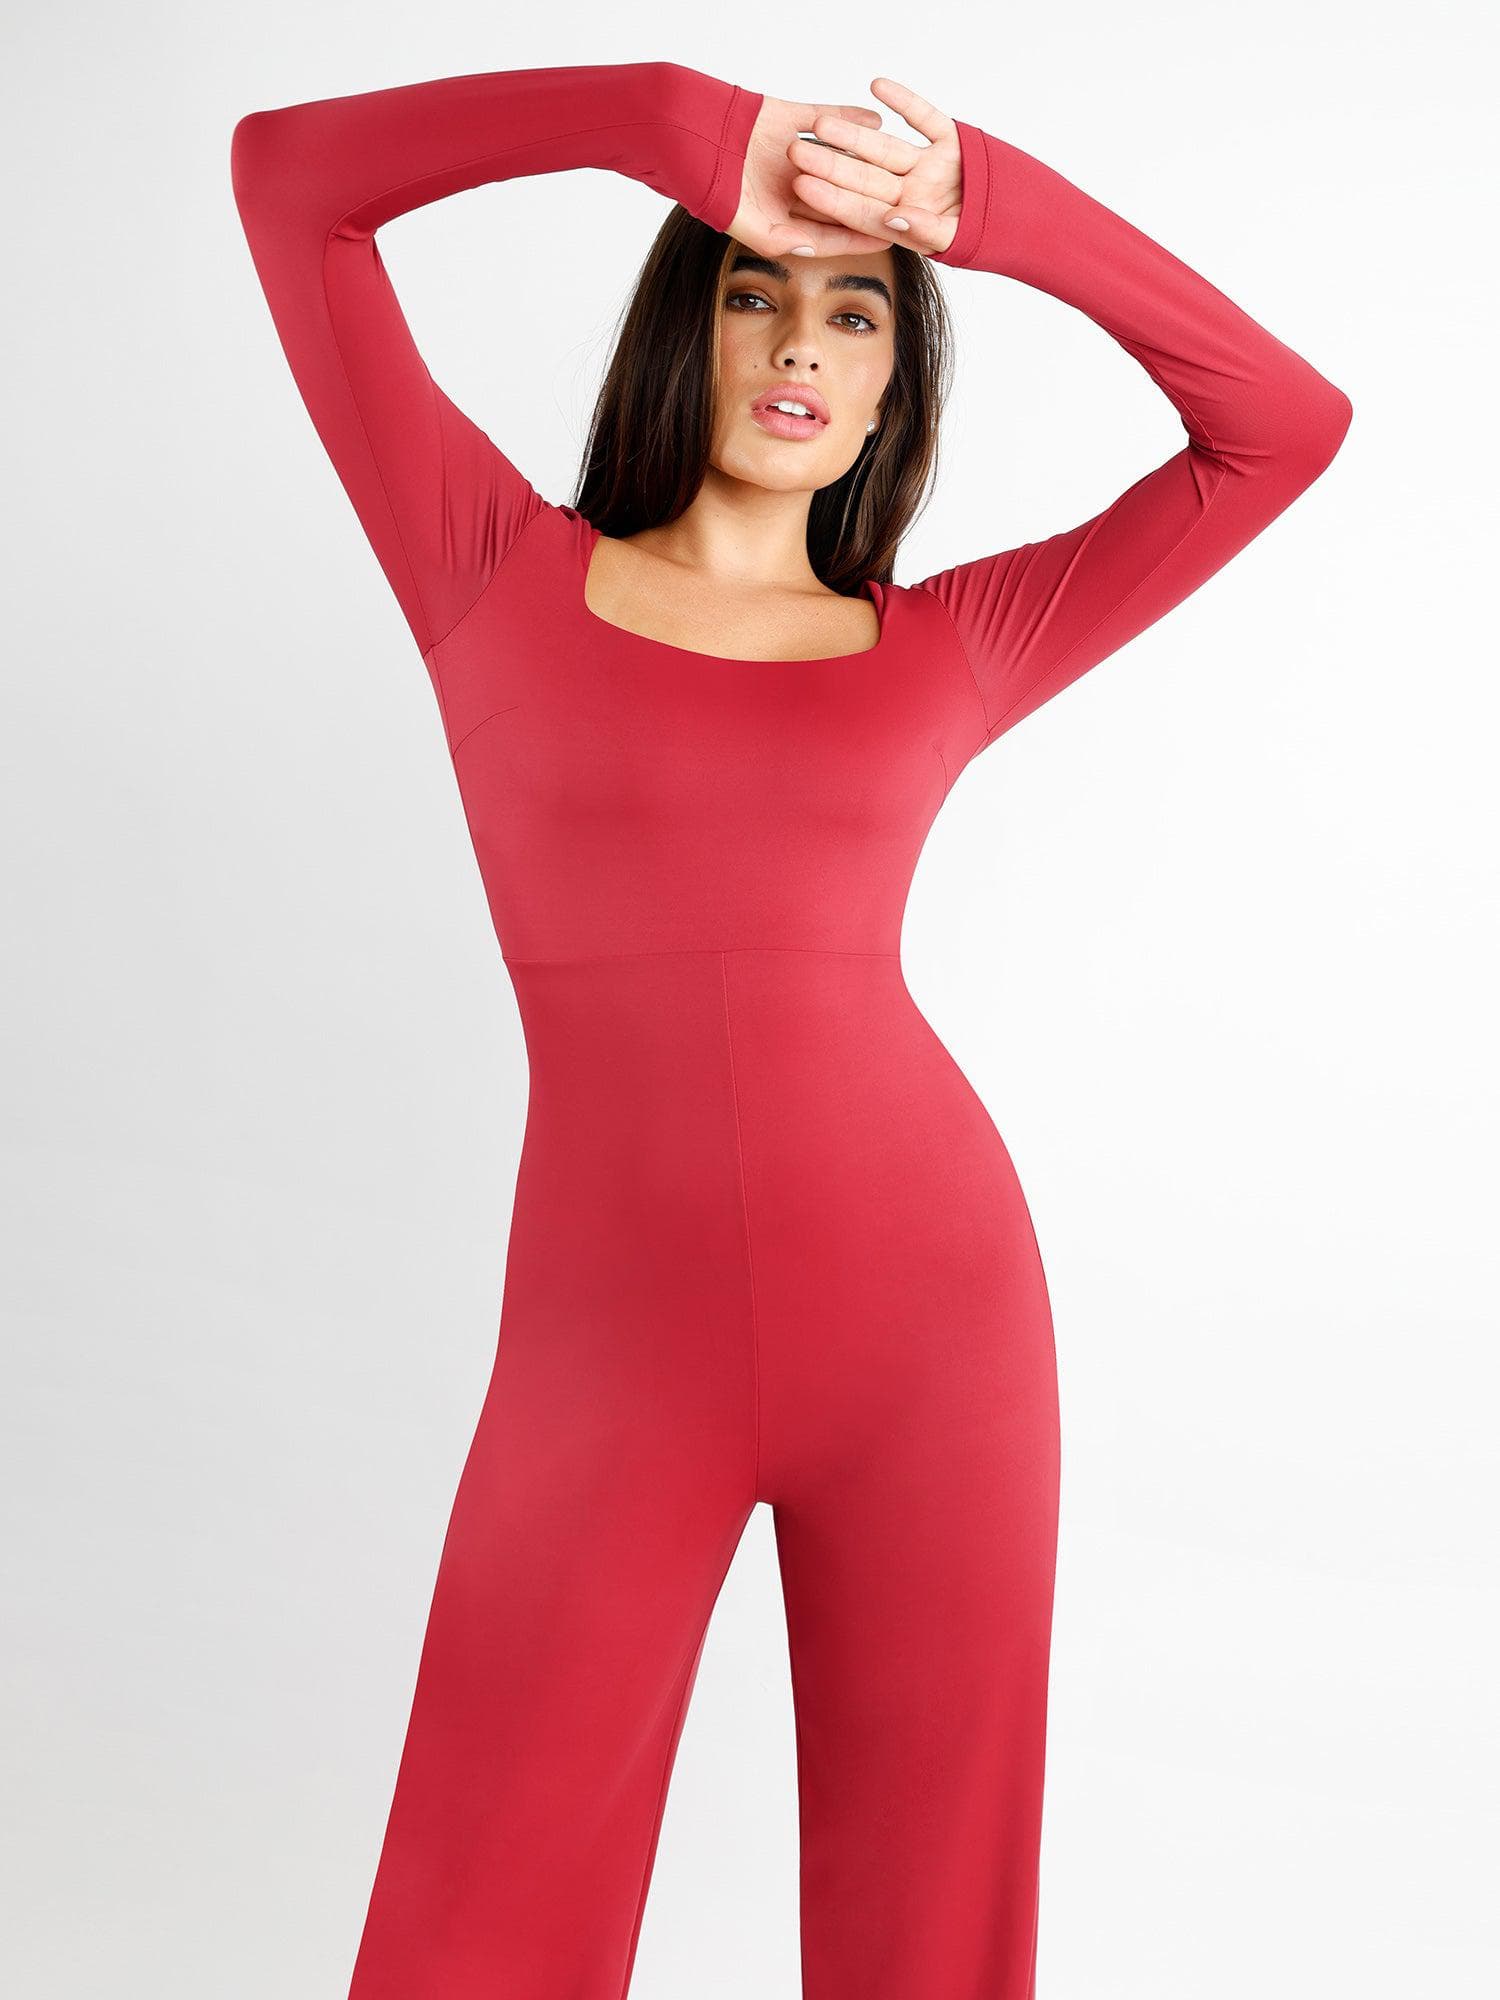 PUMIEY Jumpsuits for Women Square Neck Long Sleeve Bangladesh